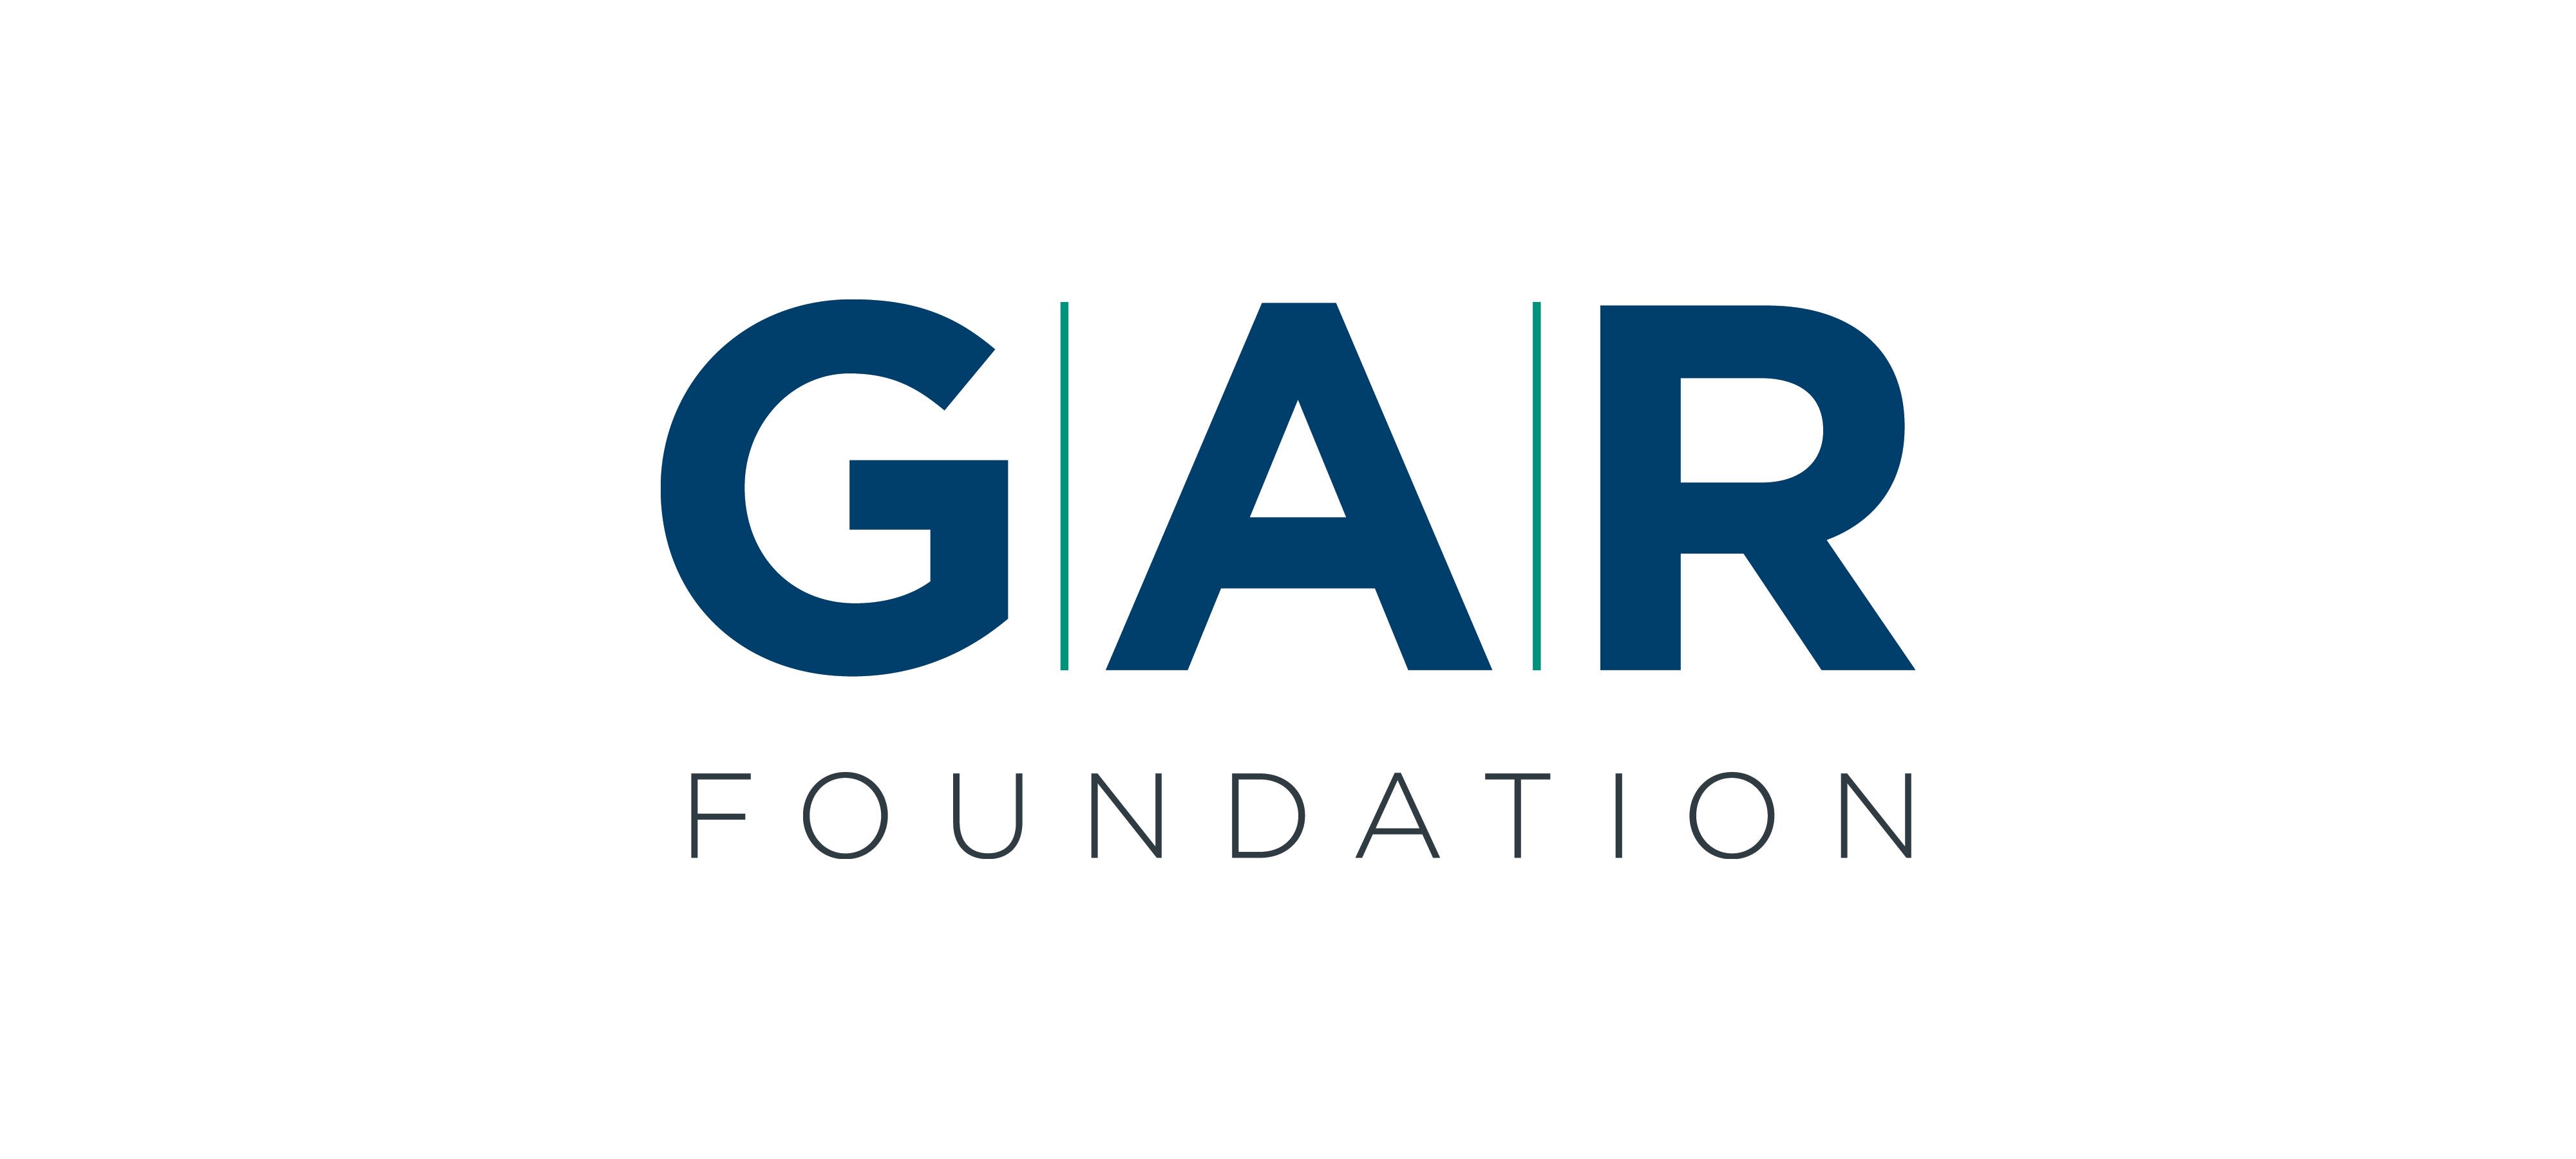 GAR Foundation awards nearly $2 million in grants to Akron-area nonprofit groups